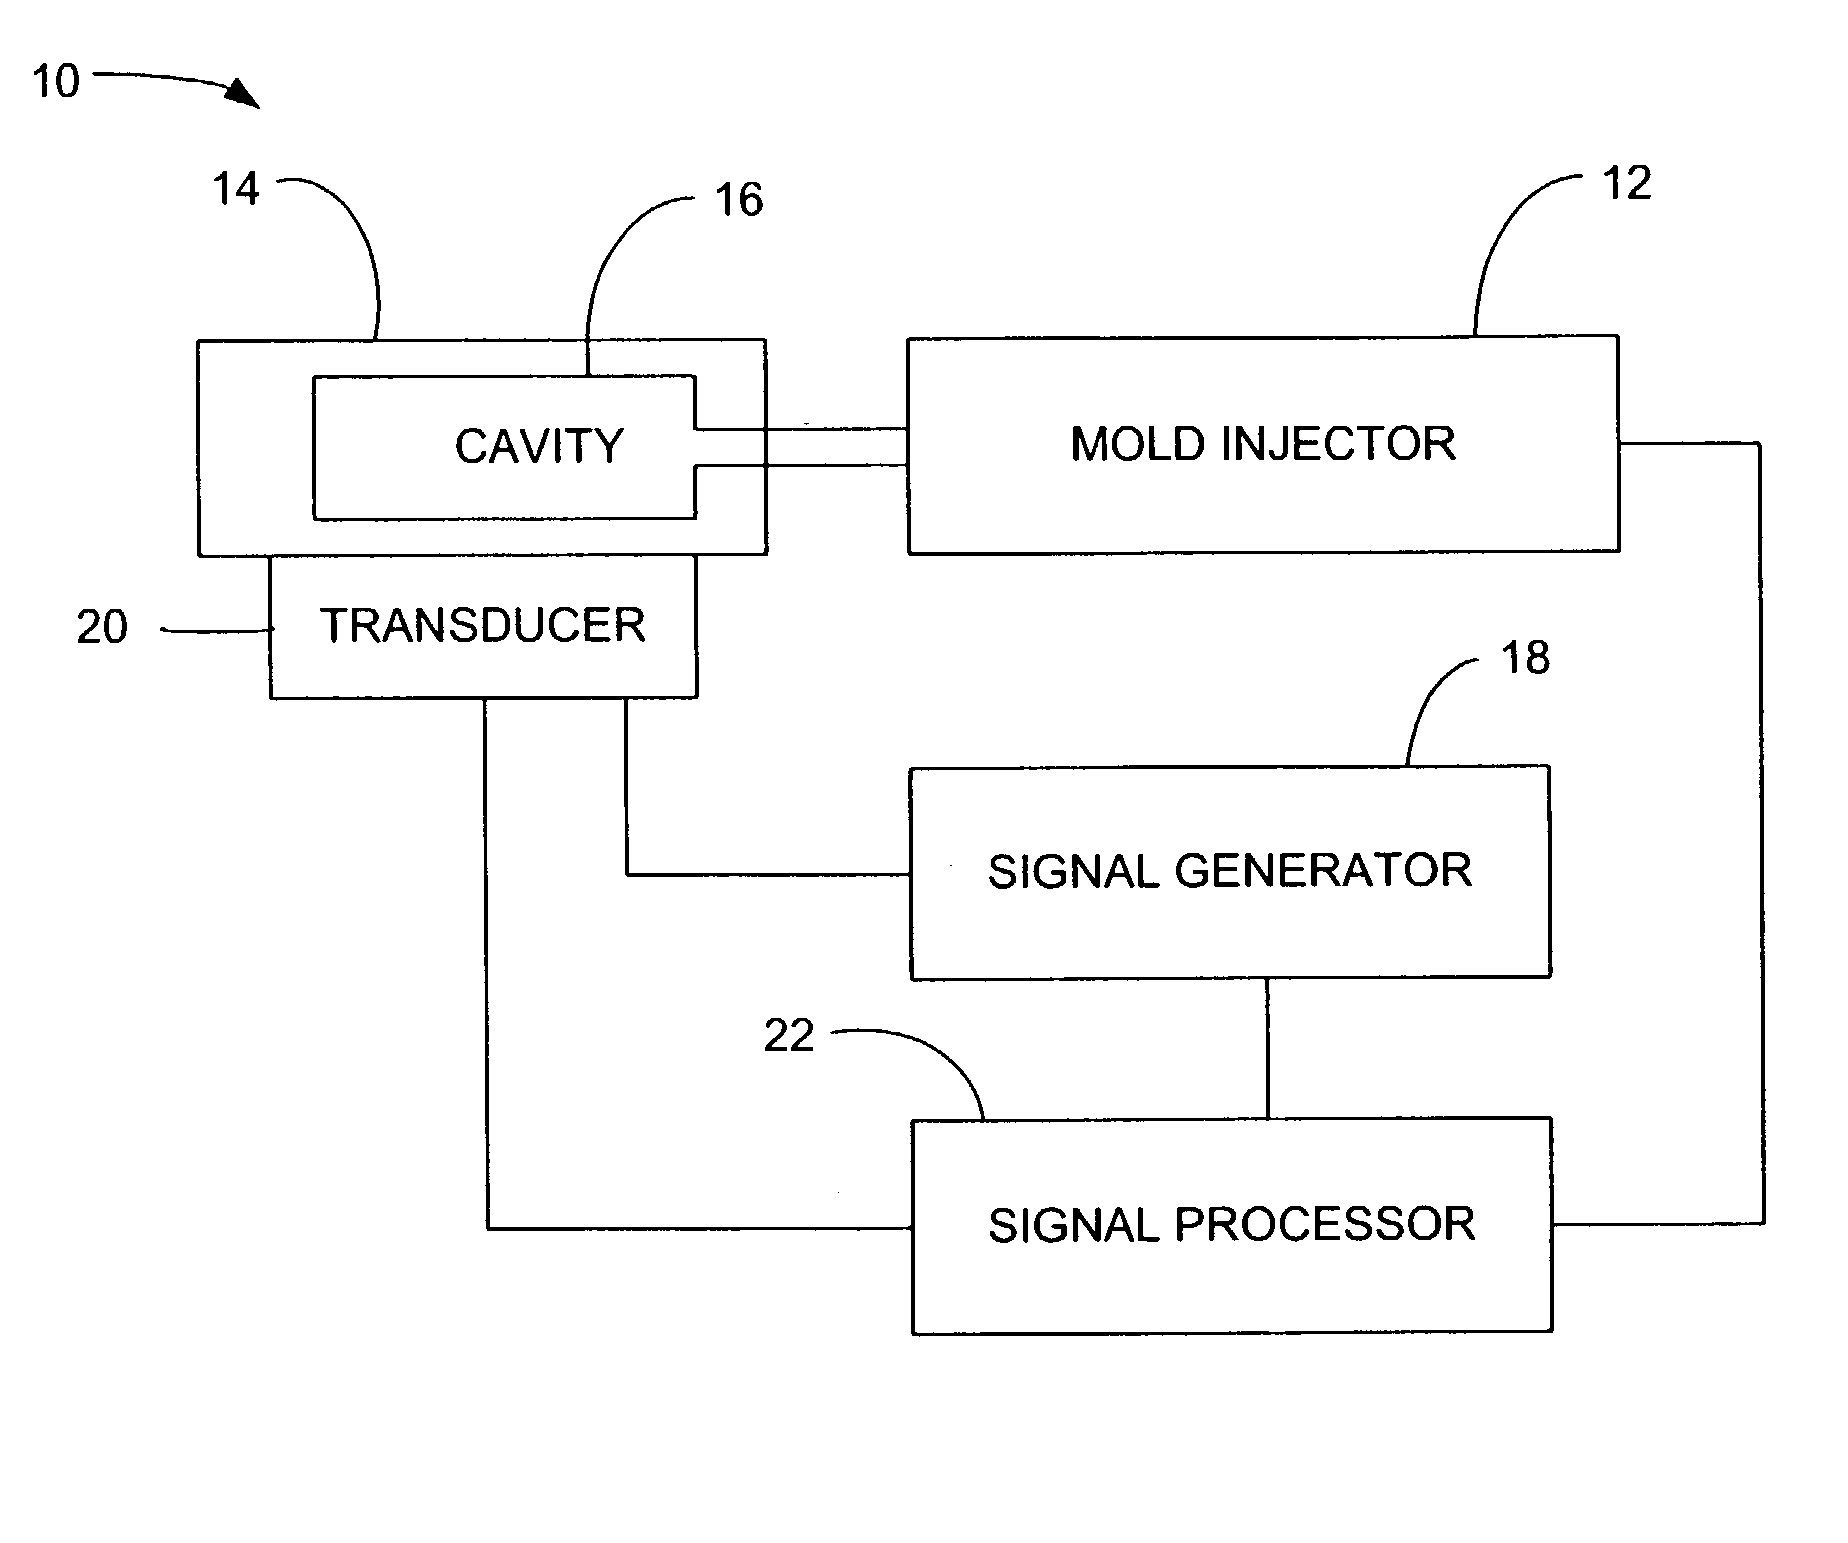 Continuous wave ultrasonic process monitor for polymer processing